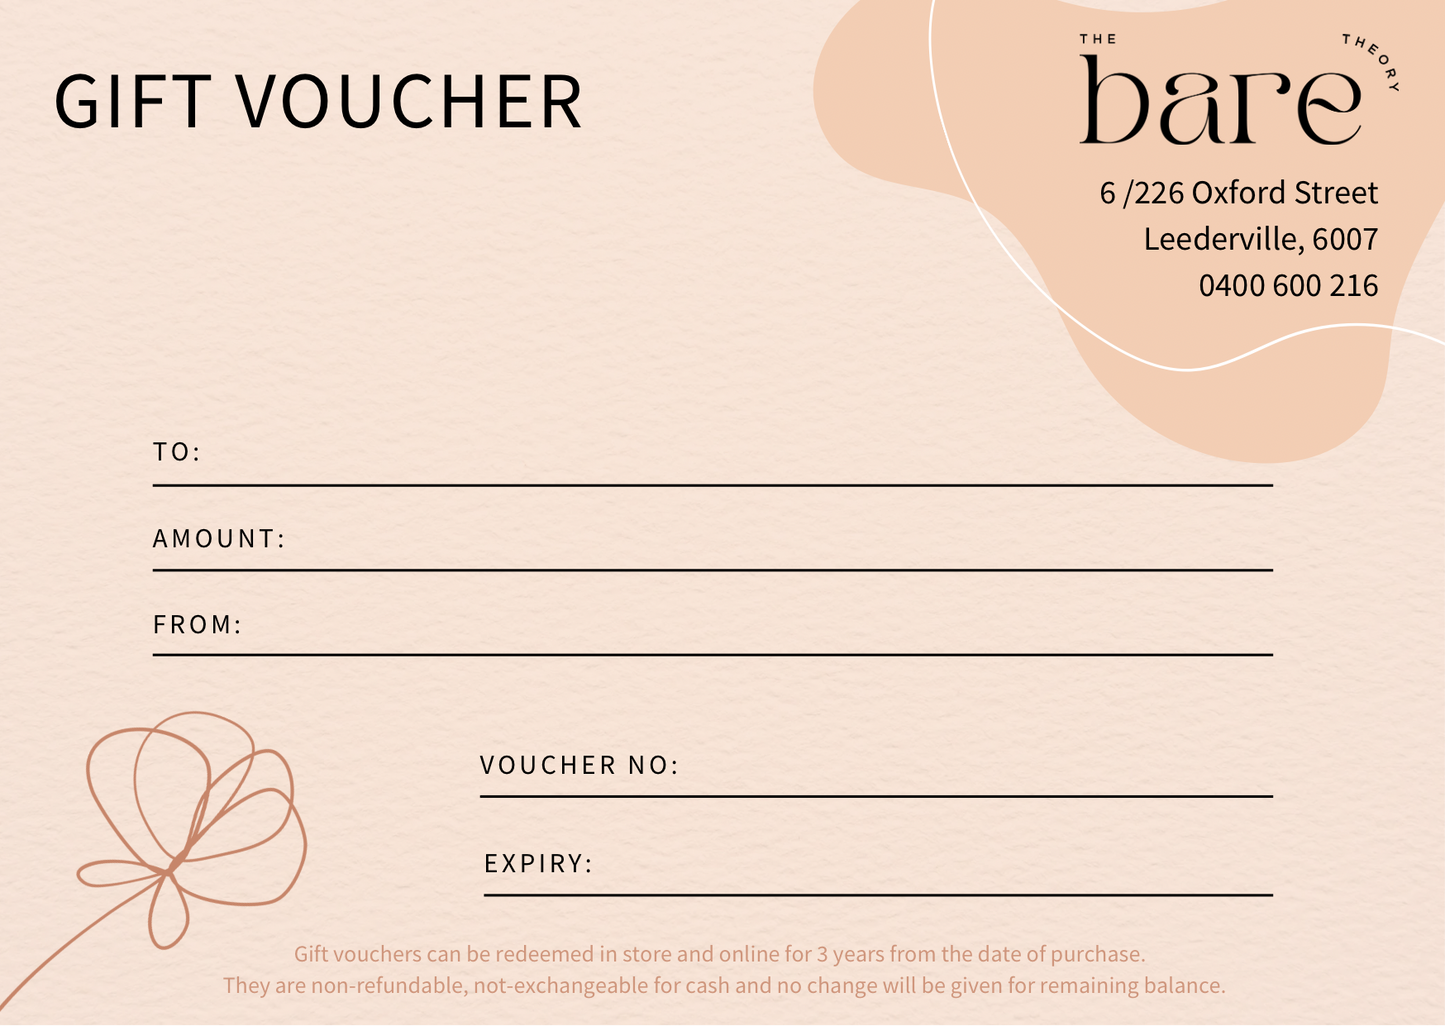 The Bare Theory Gift Voucher - The Bare Theory